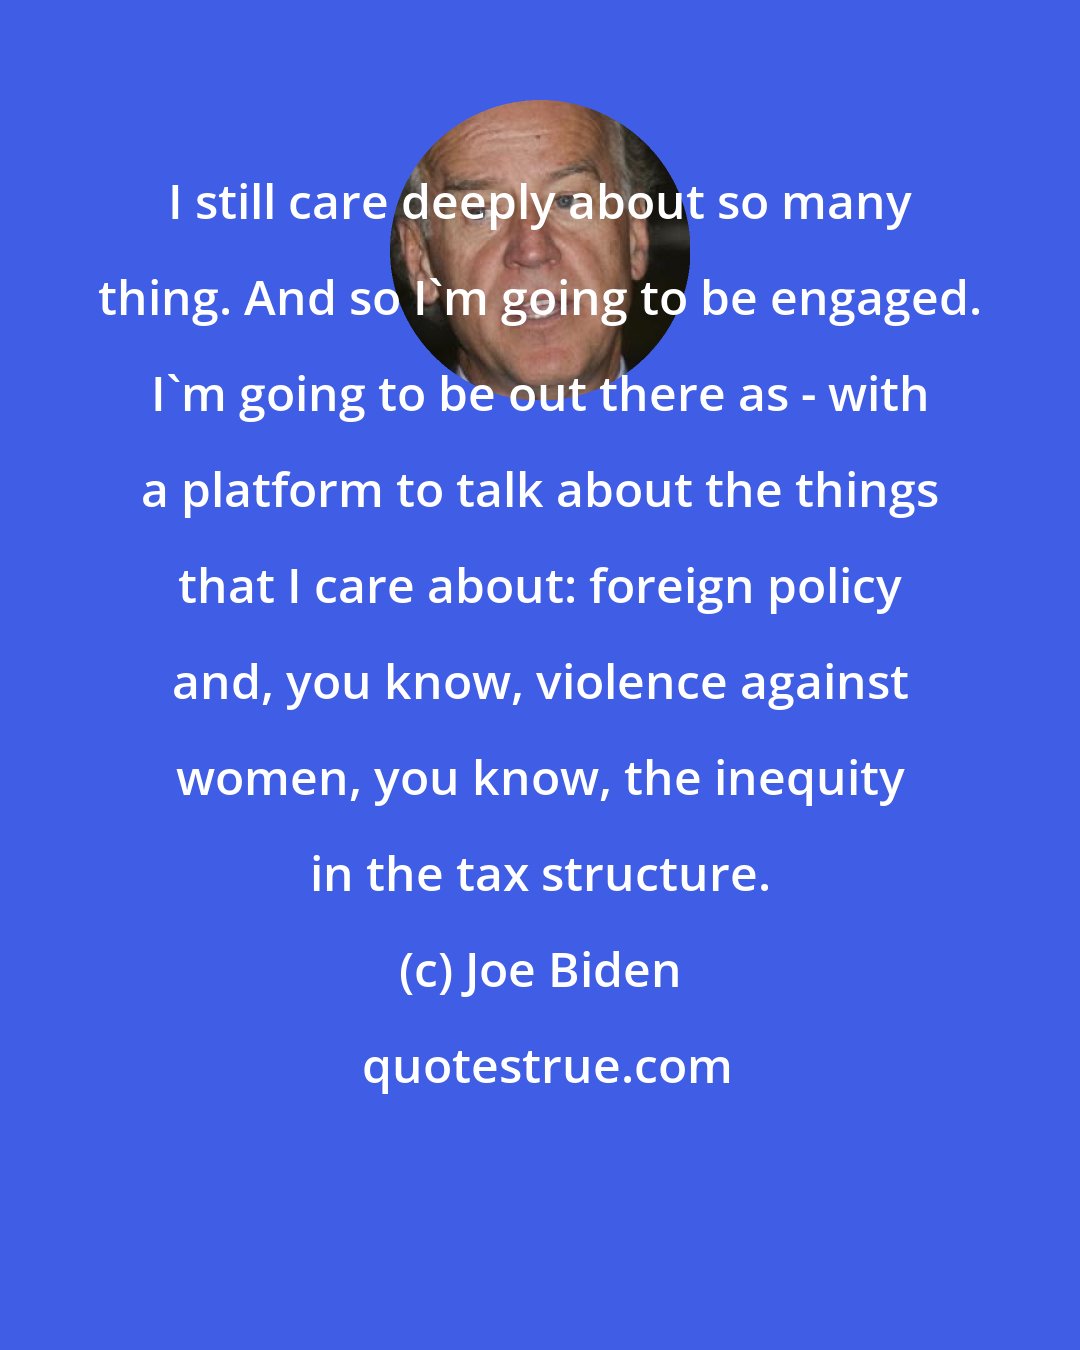 Joe Biden: I still care deeply about so many thing. And so I'm going to be engaged. I'm going to be out there as - with a platform to talk about the things that I care about: foreign policy and, you know, violence against women, you know, the inequity in the tax structure.